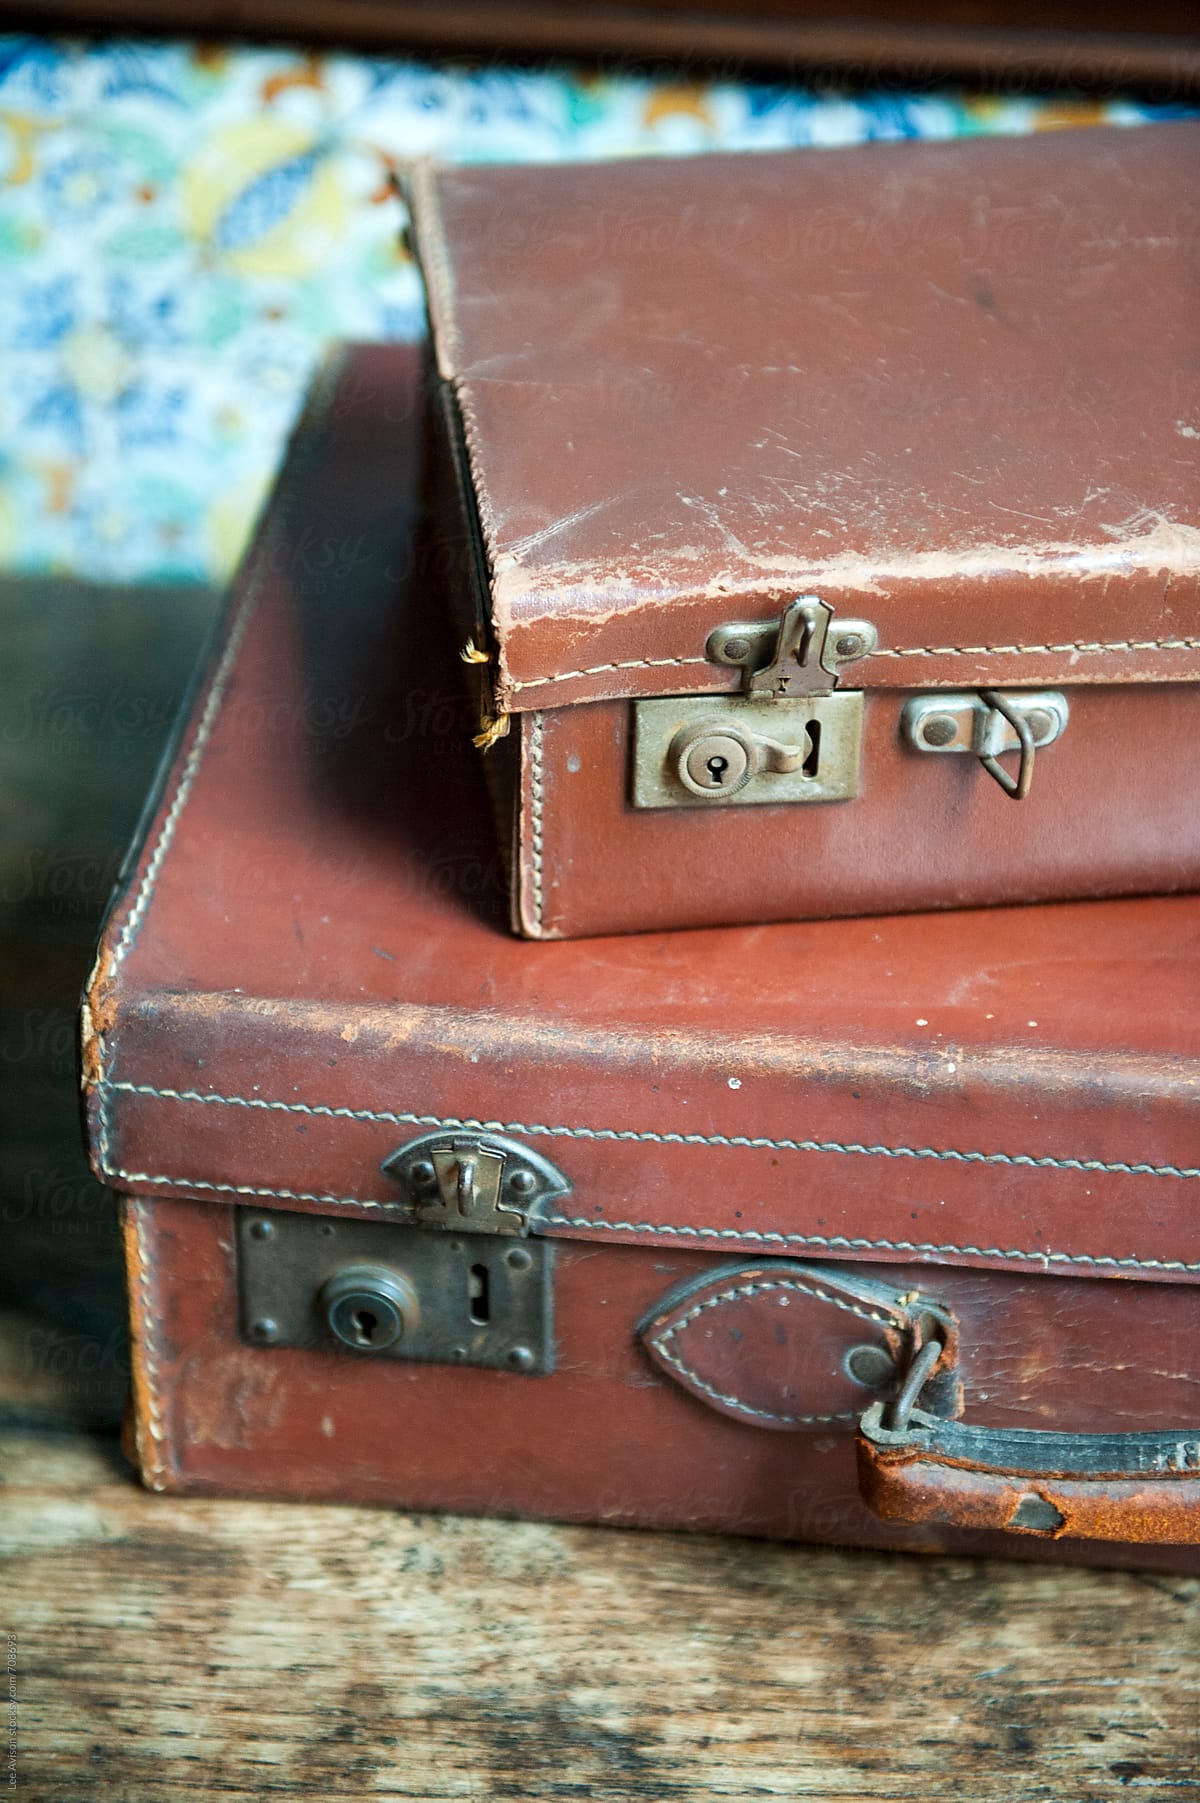 brown vintage leather suitcases